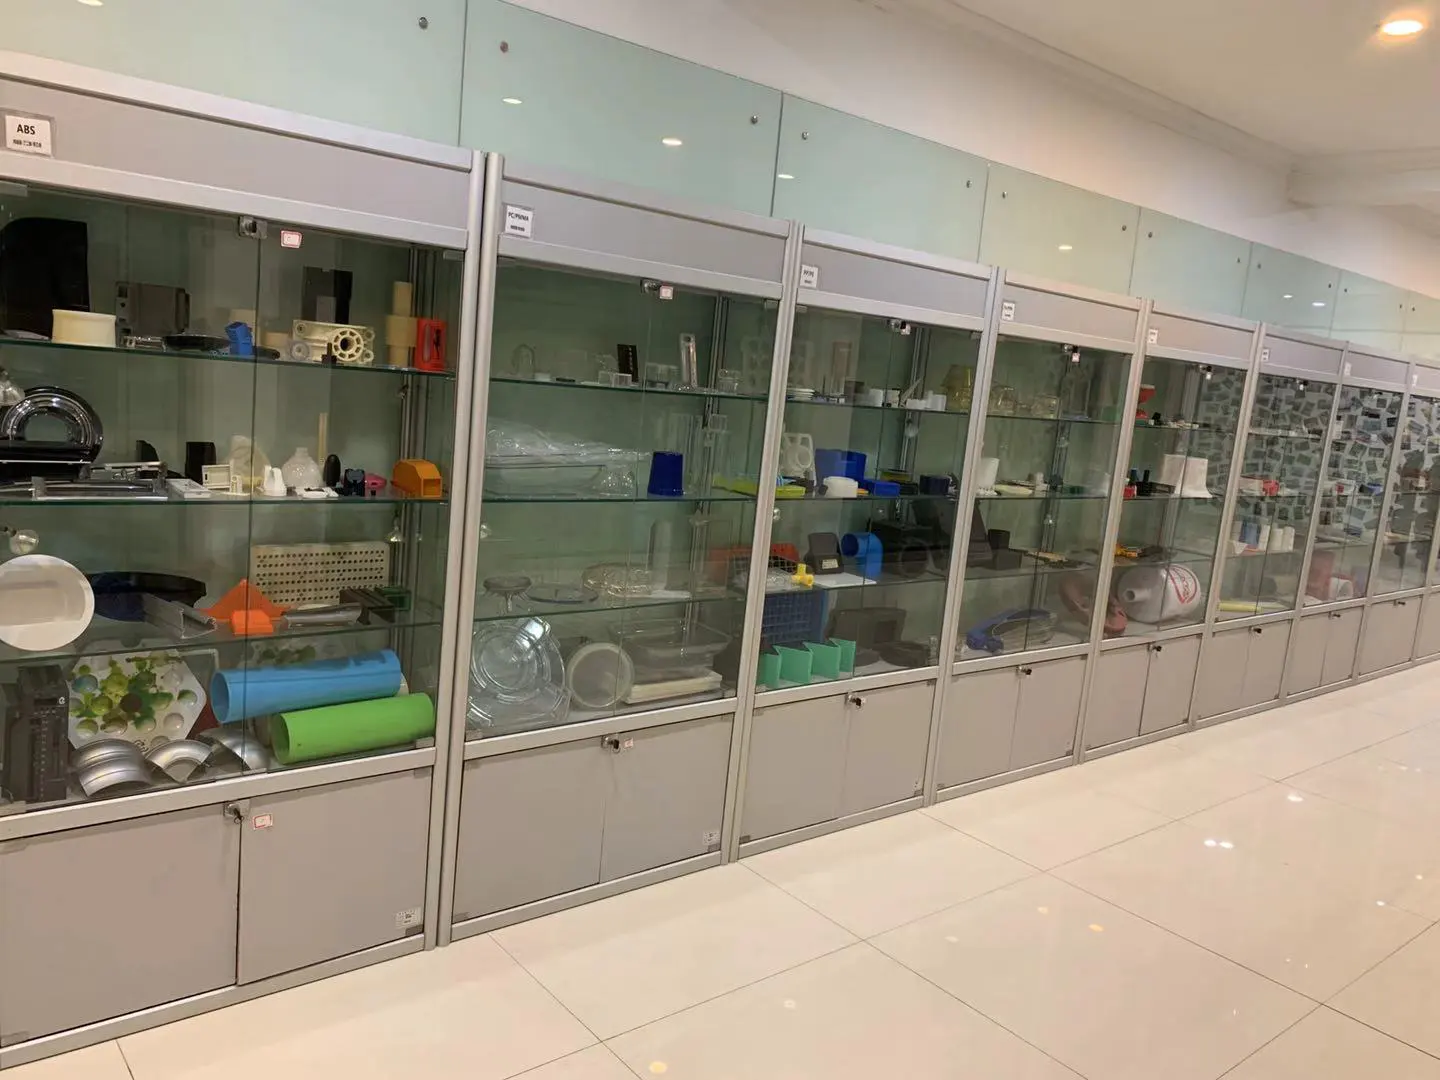 Sample room show our custom plastic manufacture ability